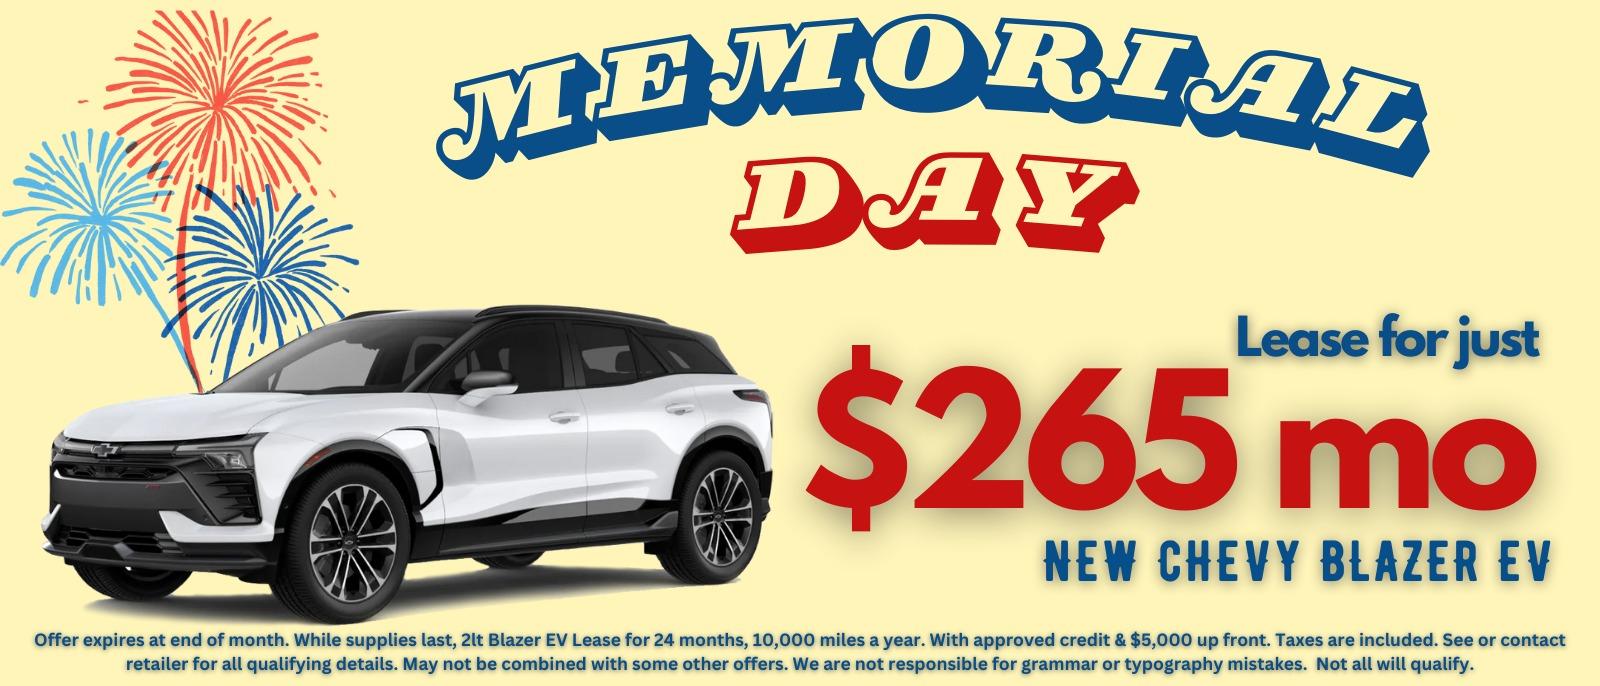 Memorial Day Blazer EV - lease for just $265 per month